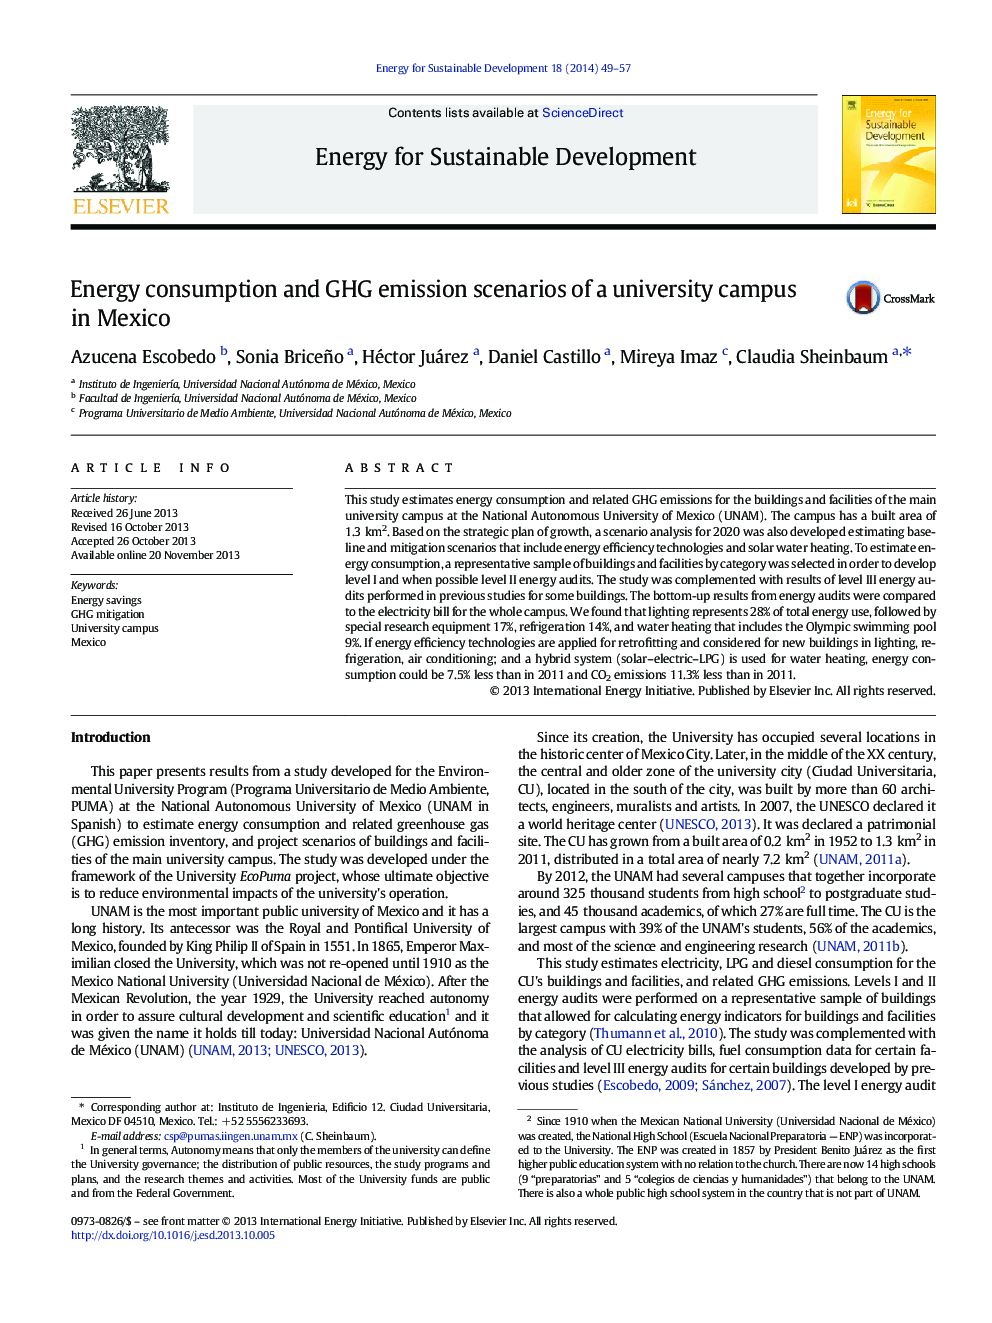 Energy consumption and GHG emission scenarios of a university campus in Mexico